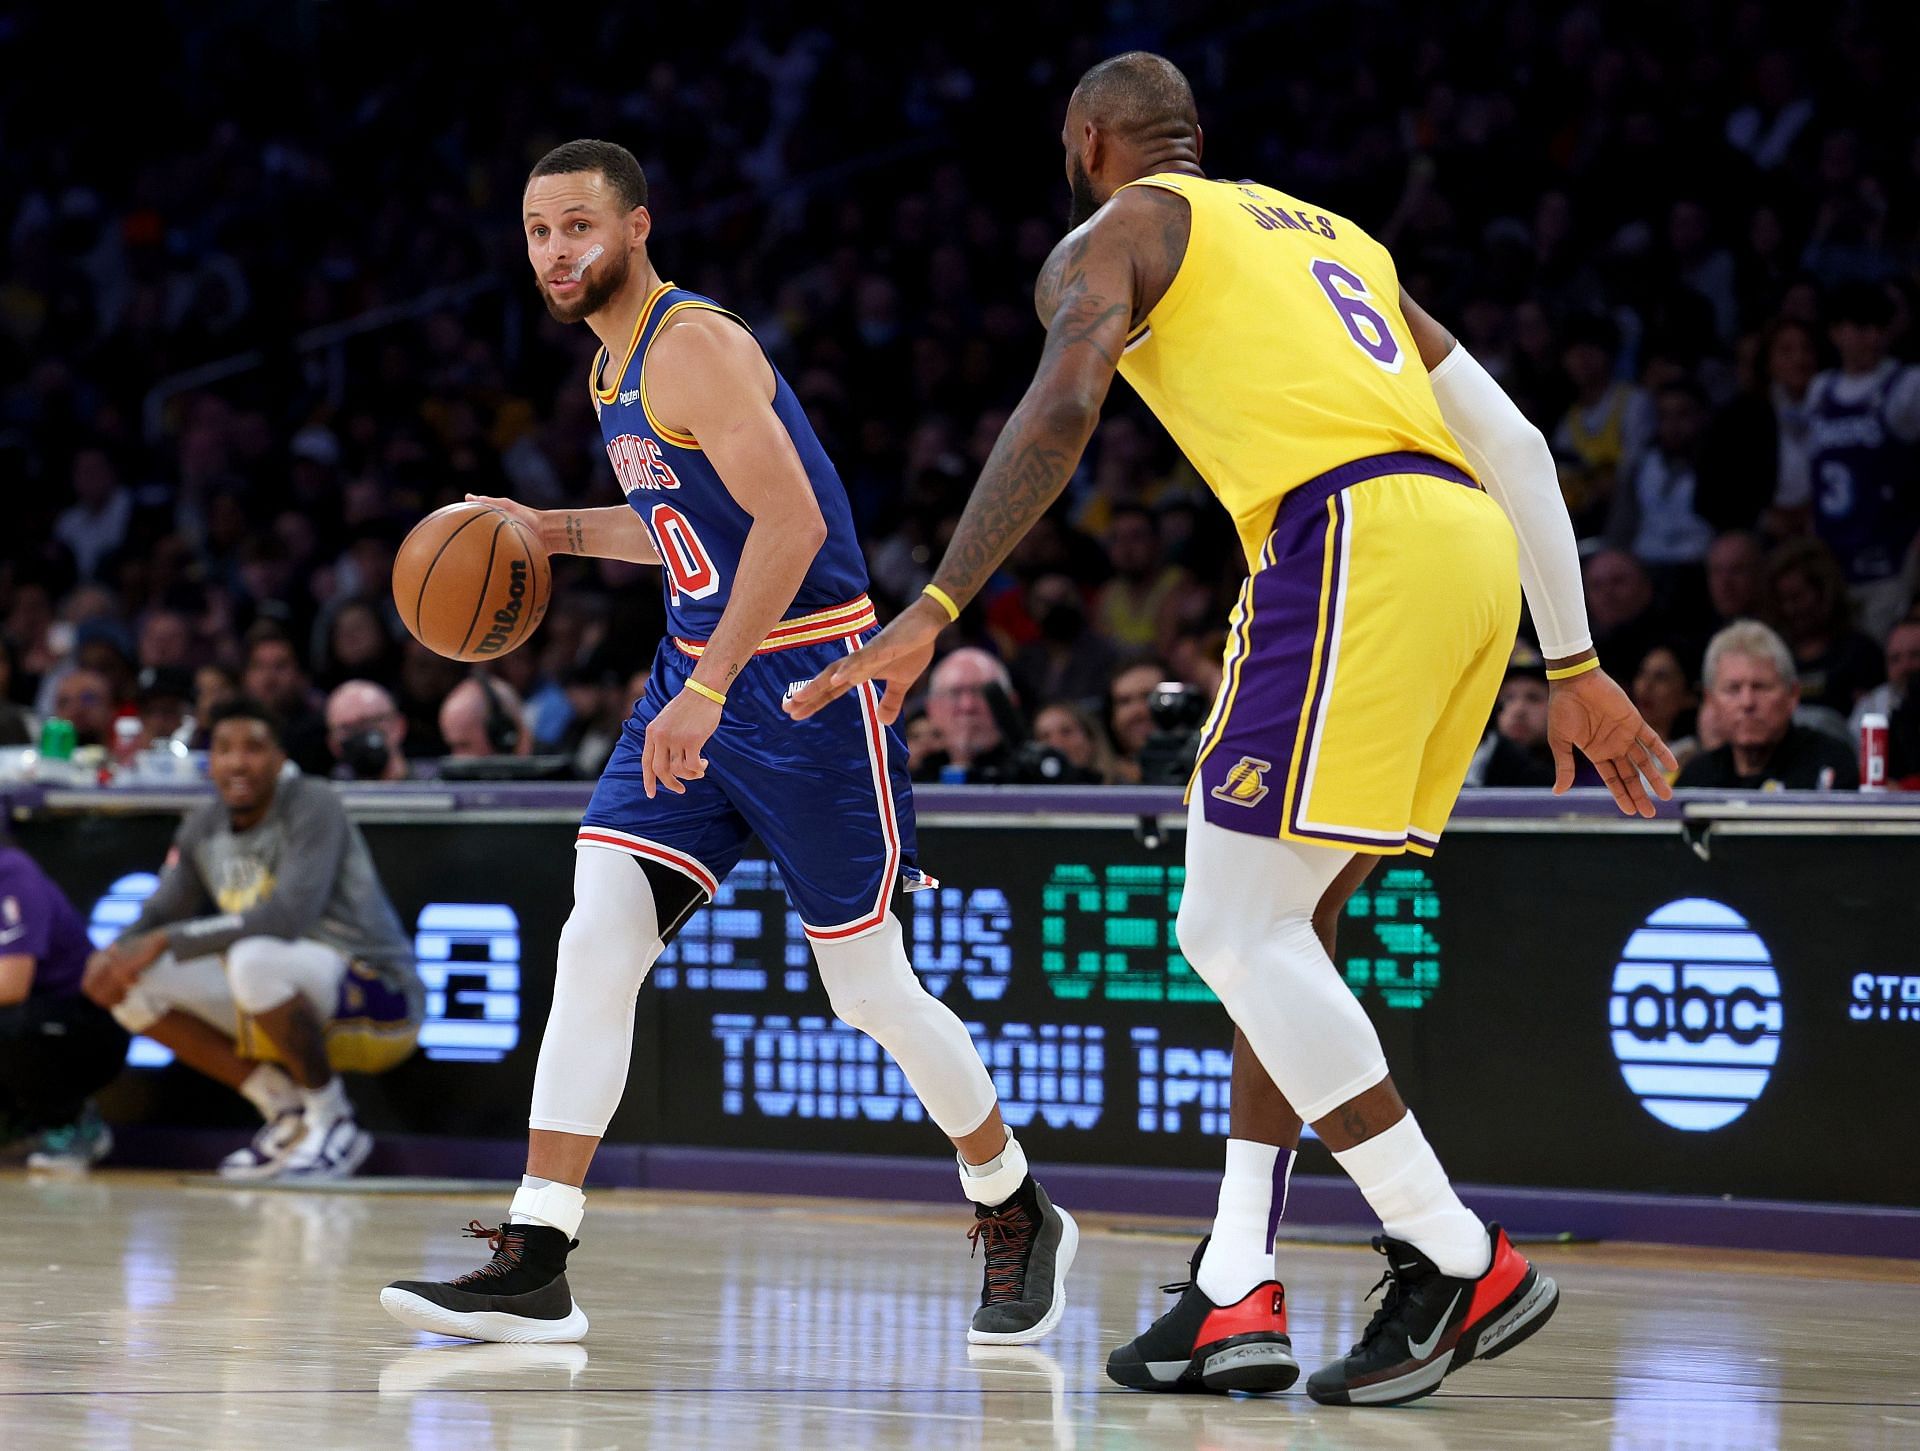 Golden State Warriors guard Steph Curry and Lakers forward LeBron James